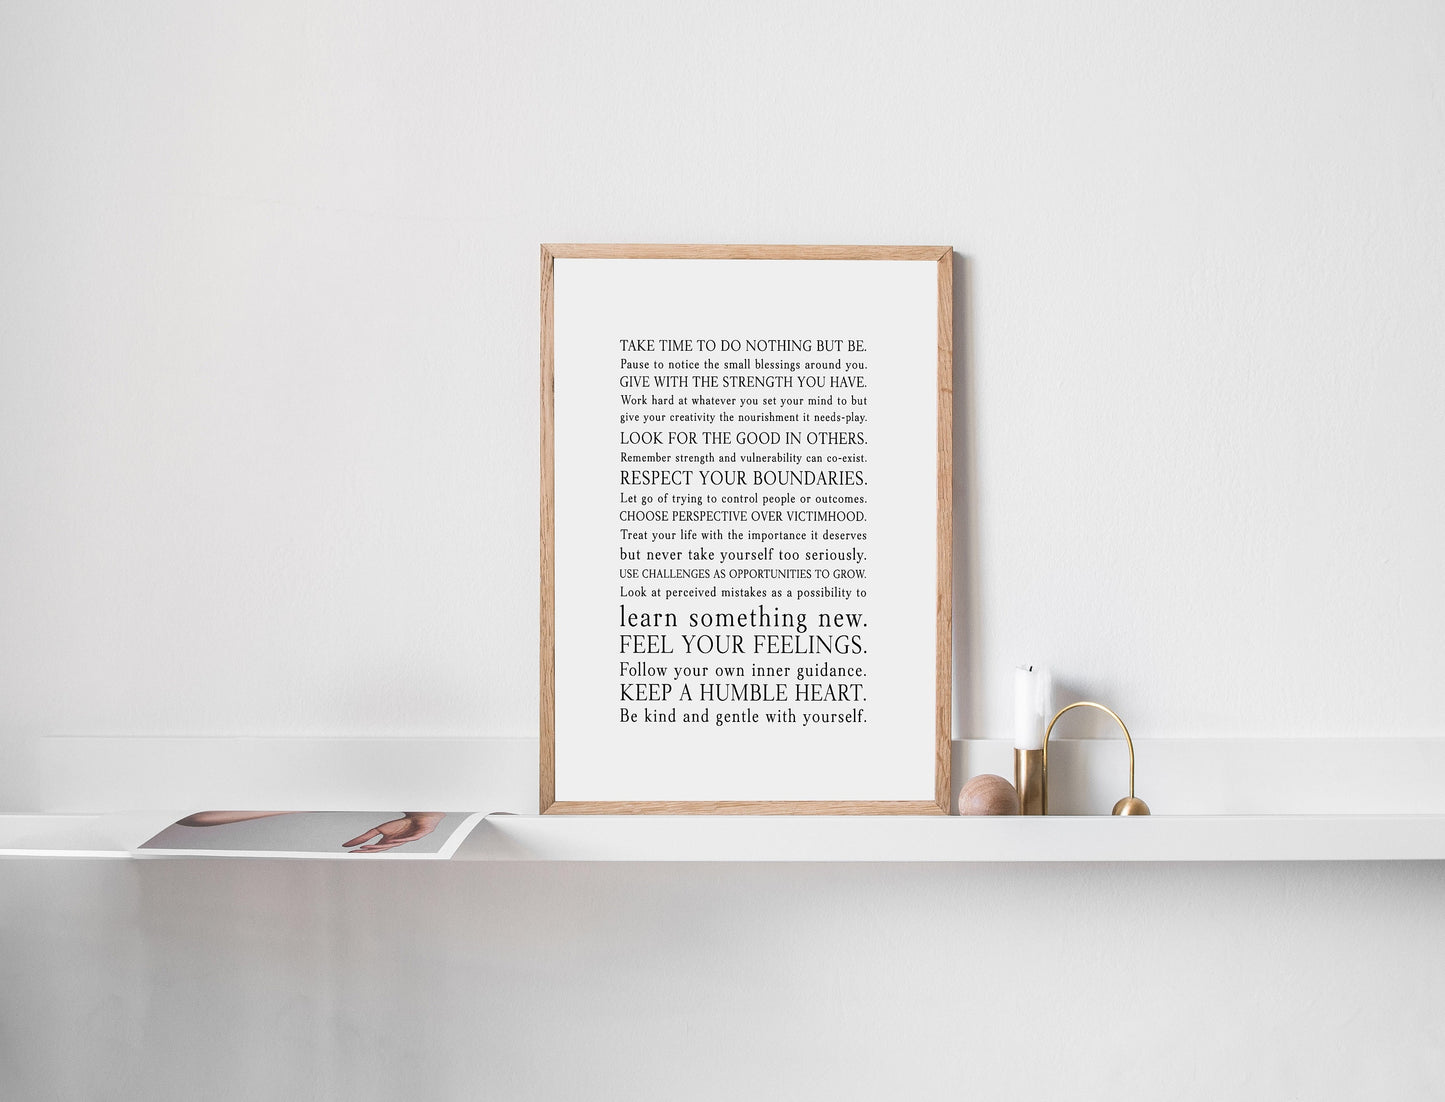 Words to live by,Manifesto art print,Graduation gift,Inspirational quote print,Motivational saying,Encouragement gift,Family manifesto